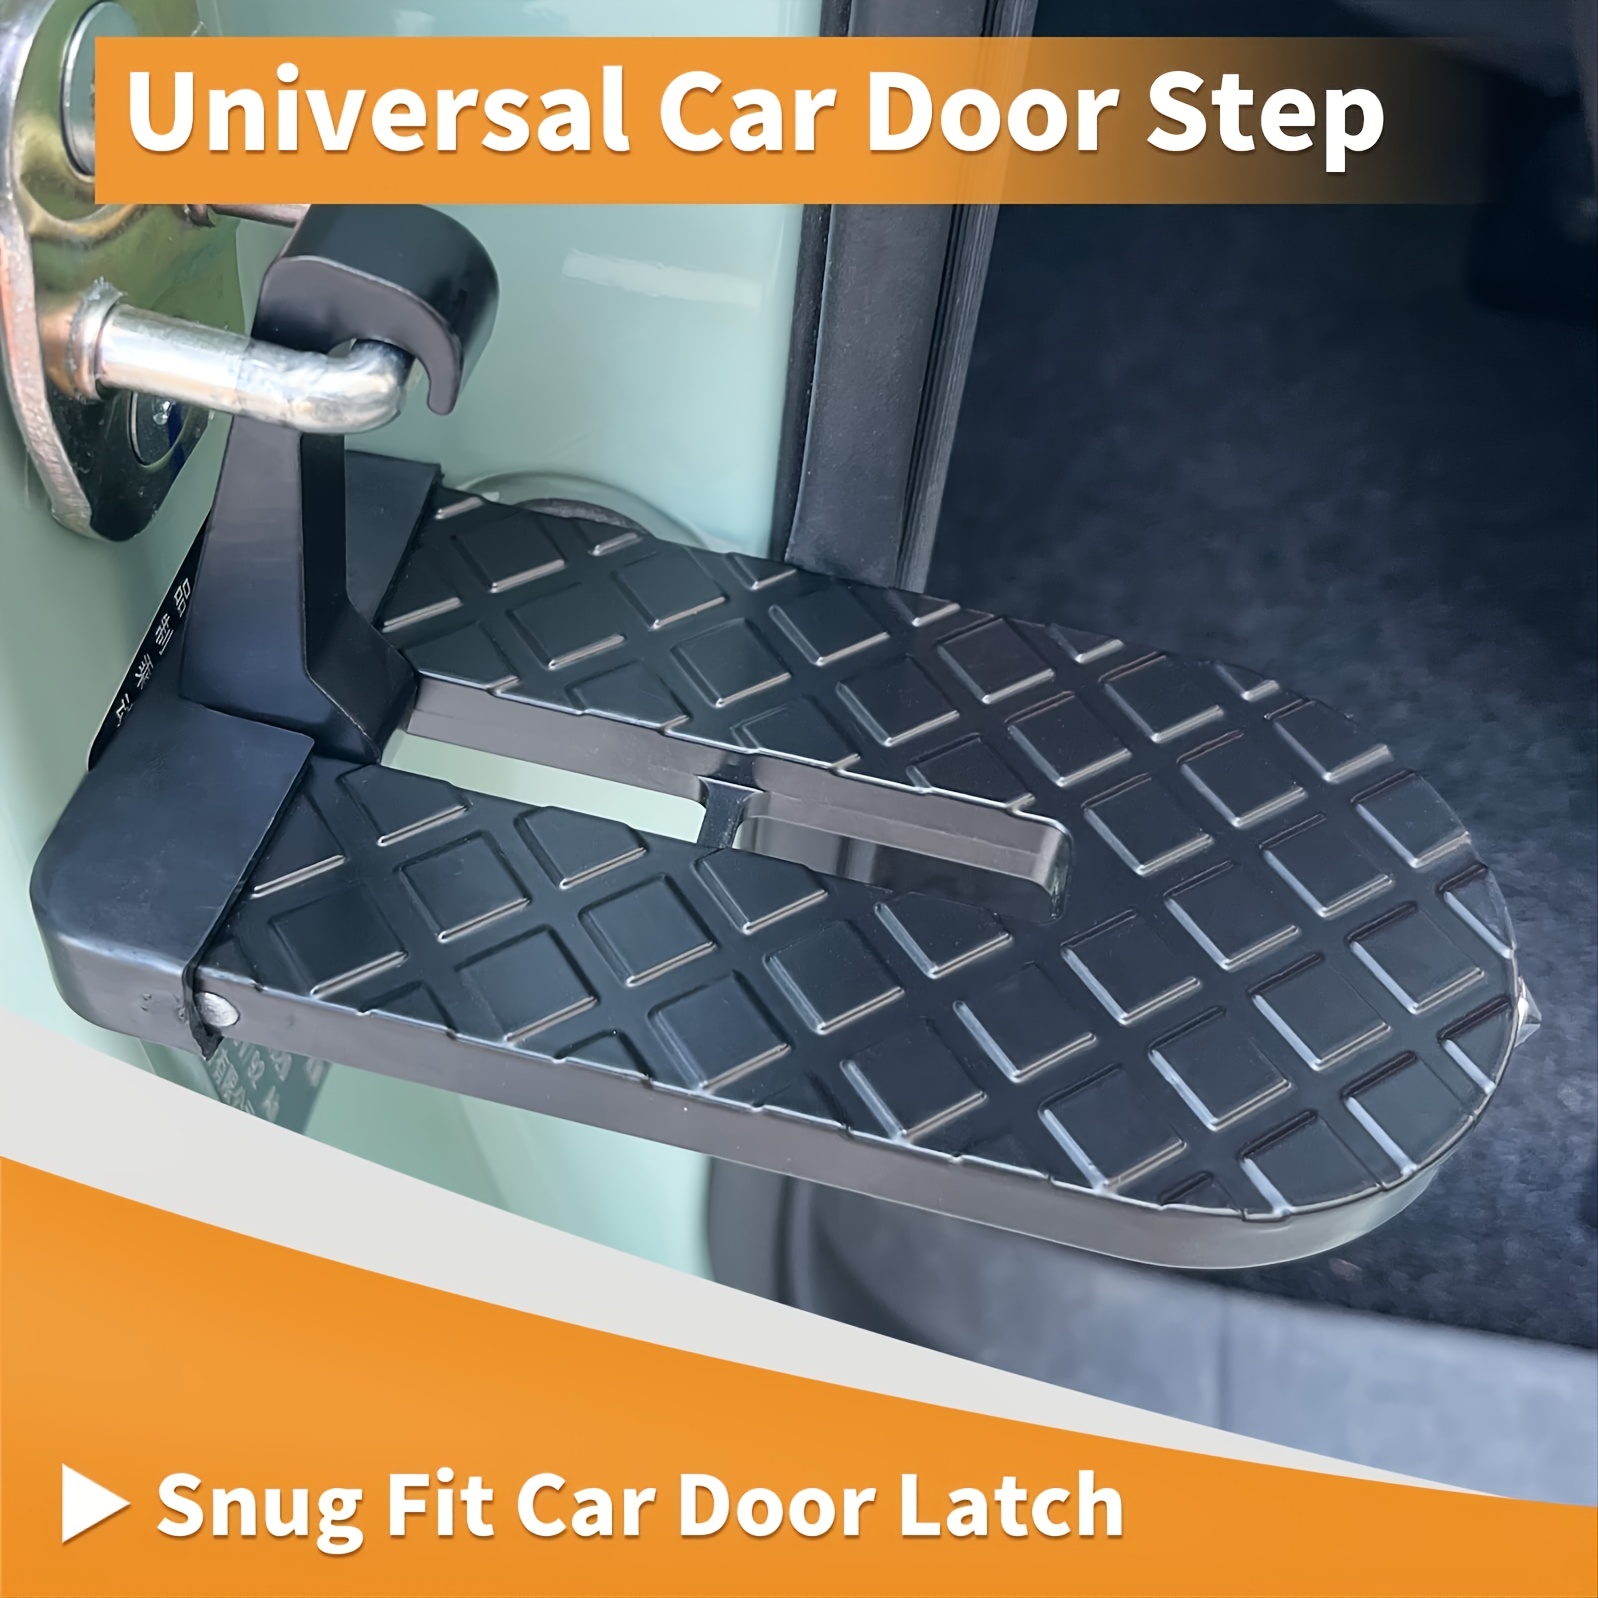 Car Door Step Folding Car Door Pedal Ladder For Cars Easy Access To Roof  Rack Of The Car, Universal Doorstep Fits The Vehicle With U Door Hatches